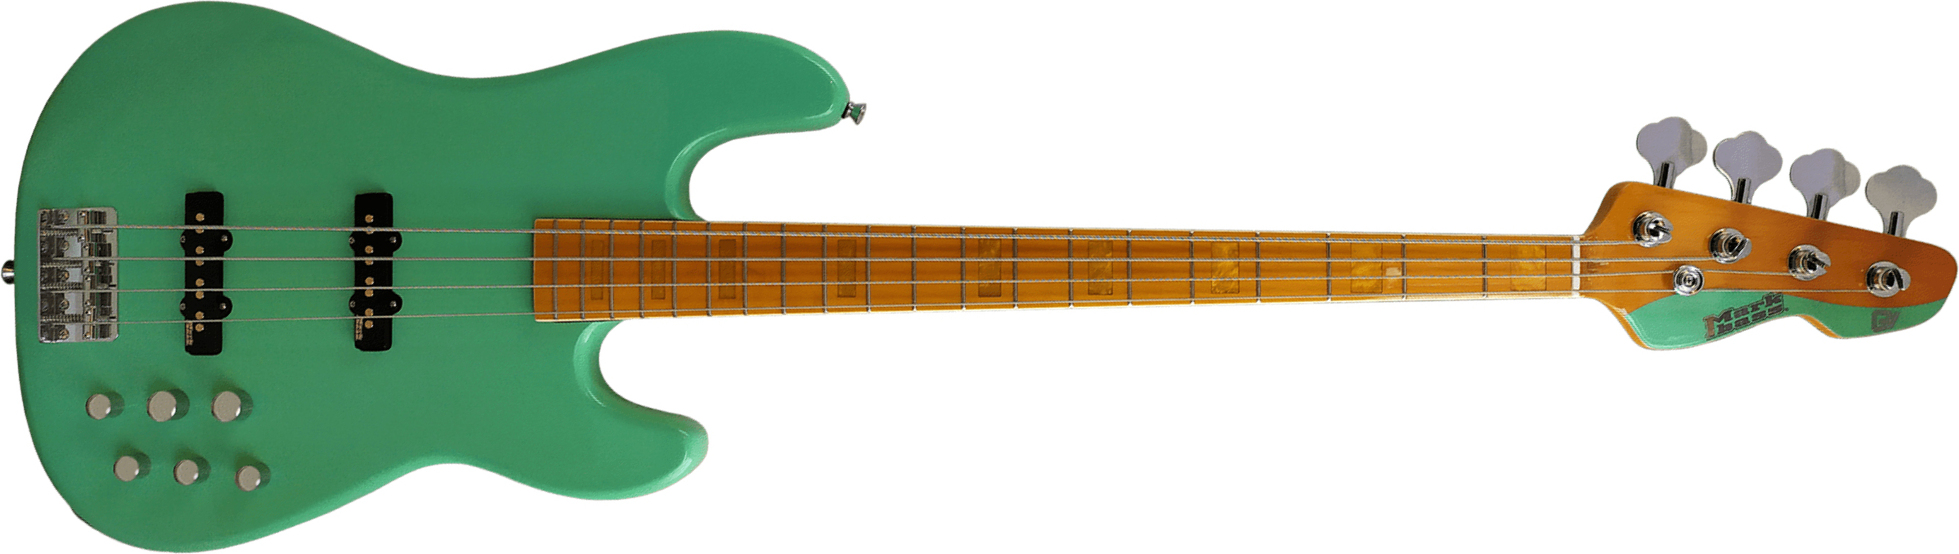 Markbass Mb Gv 4 Gloxy Val Cr Mp Active Mn - Surf Green - Basse Électrique Solid Body - Main picture